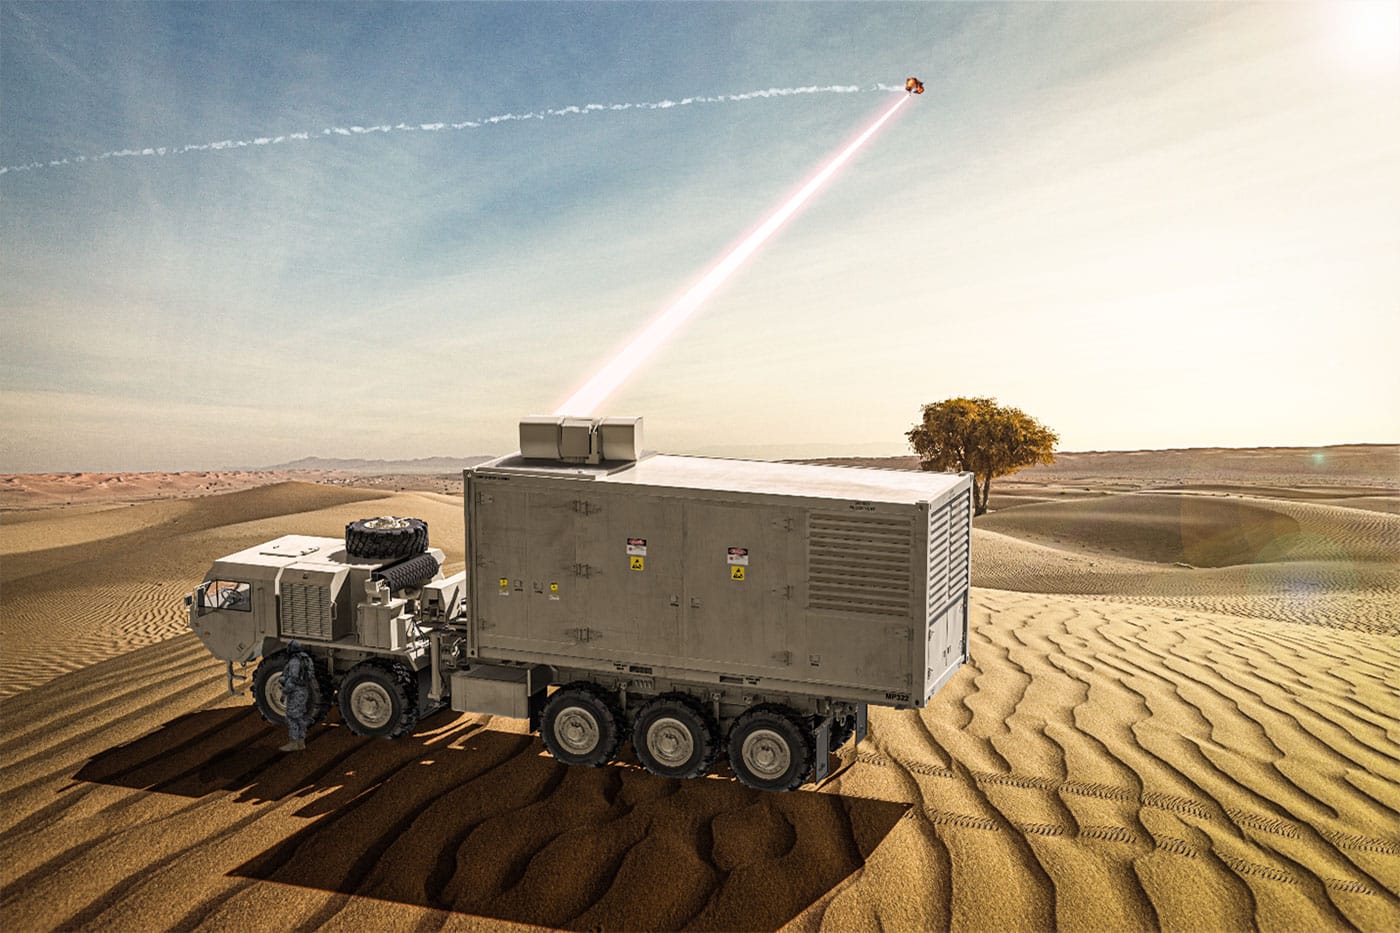 U.S. Army’s Indirect Fires Protection Capability-High Energy Laser (IFPC-HEL) Demonstrator laser weapon system.